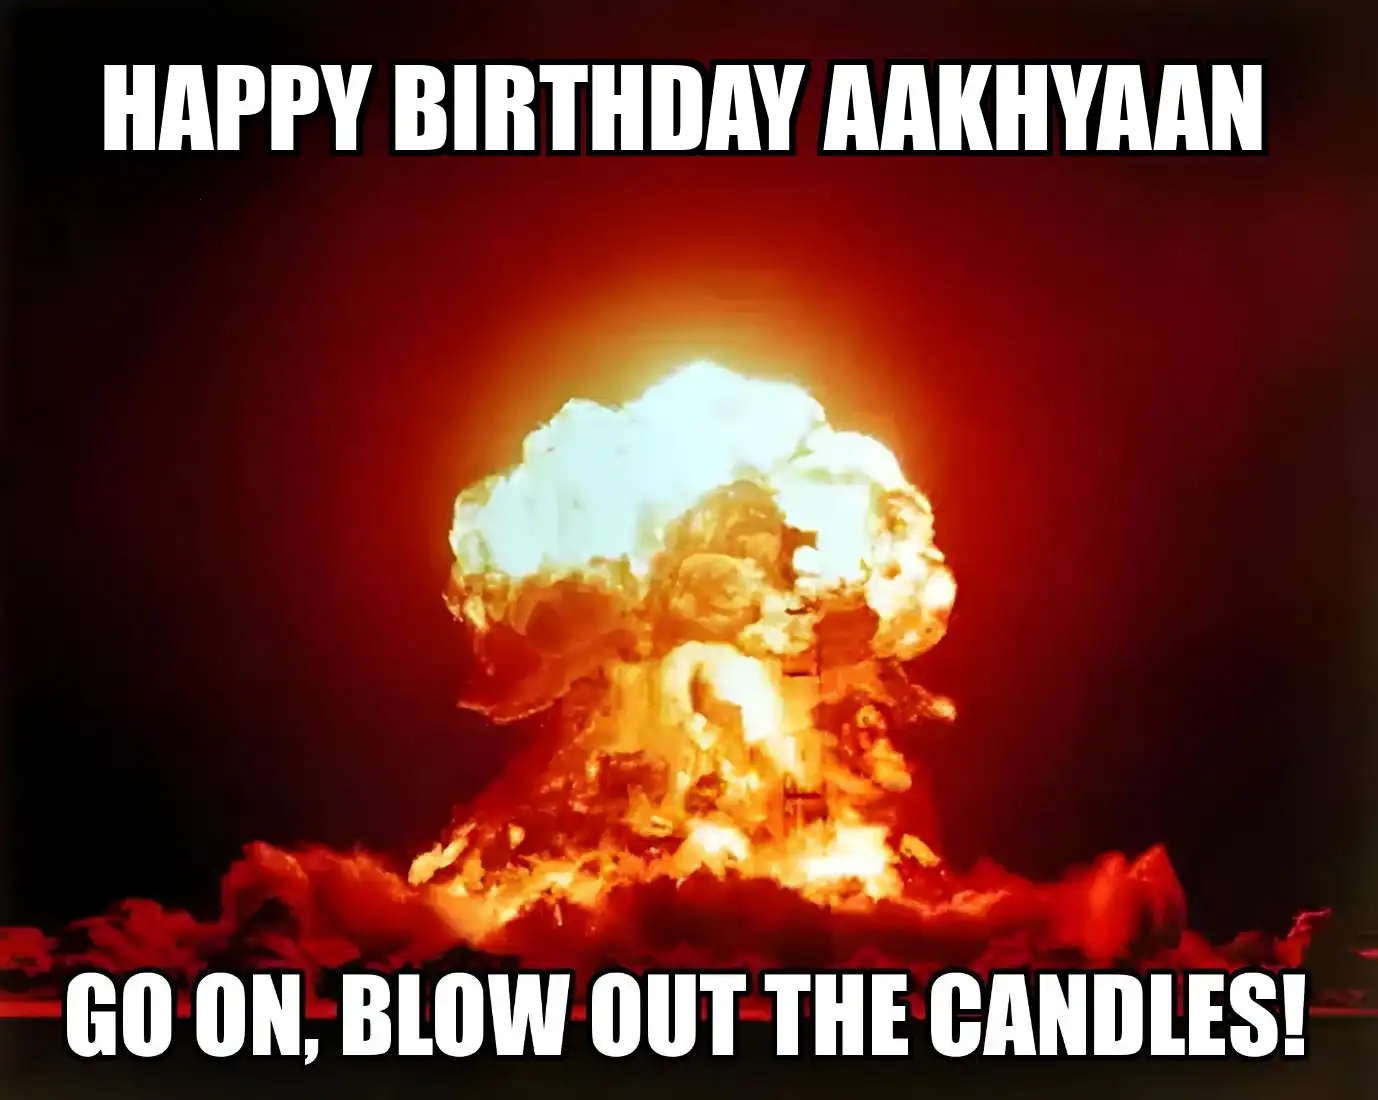 Happy Birthday Aakhyaan Go On Blow Out The Candles Meme